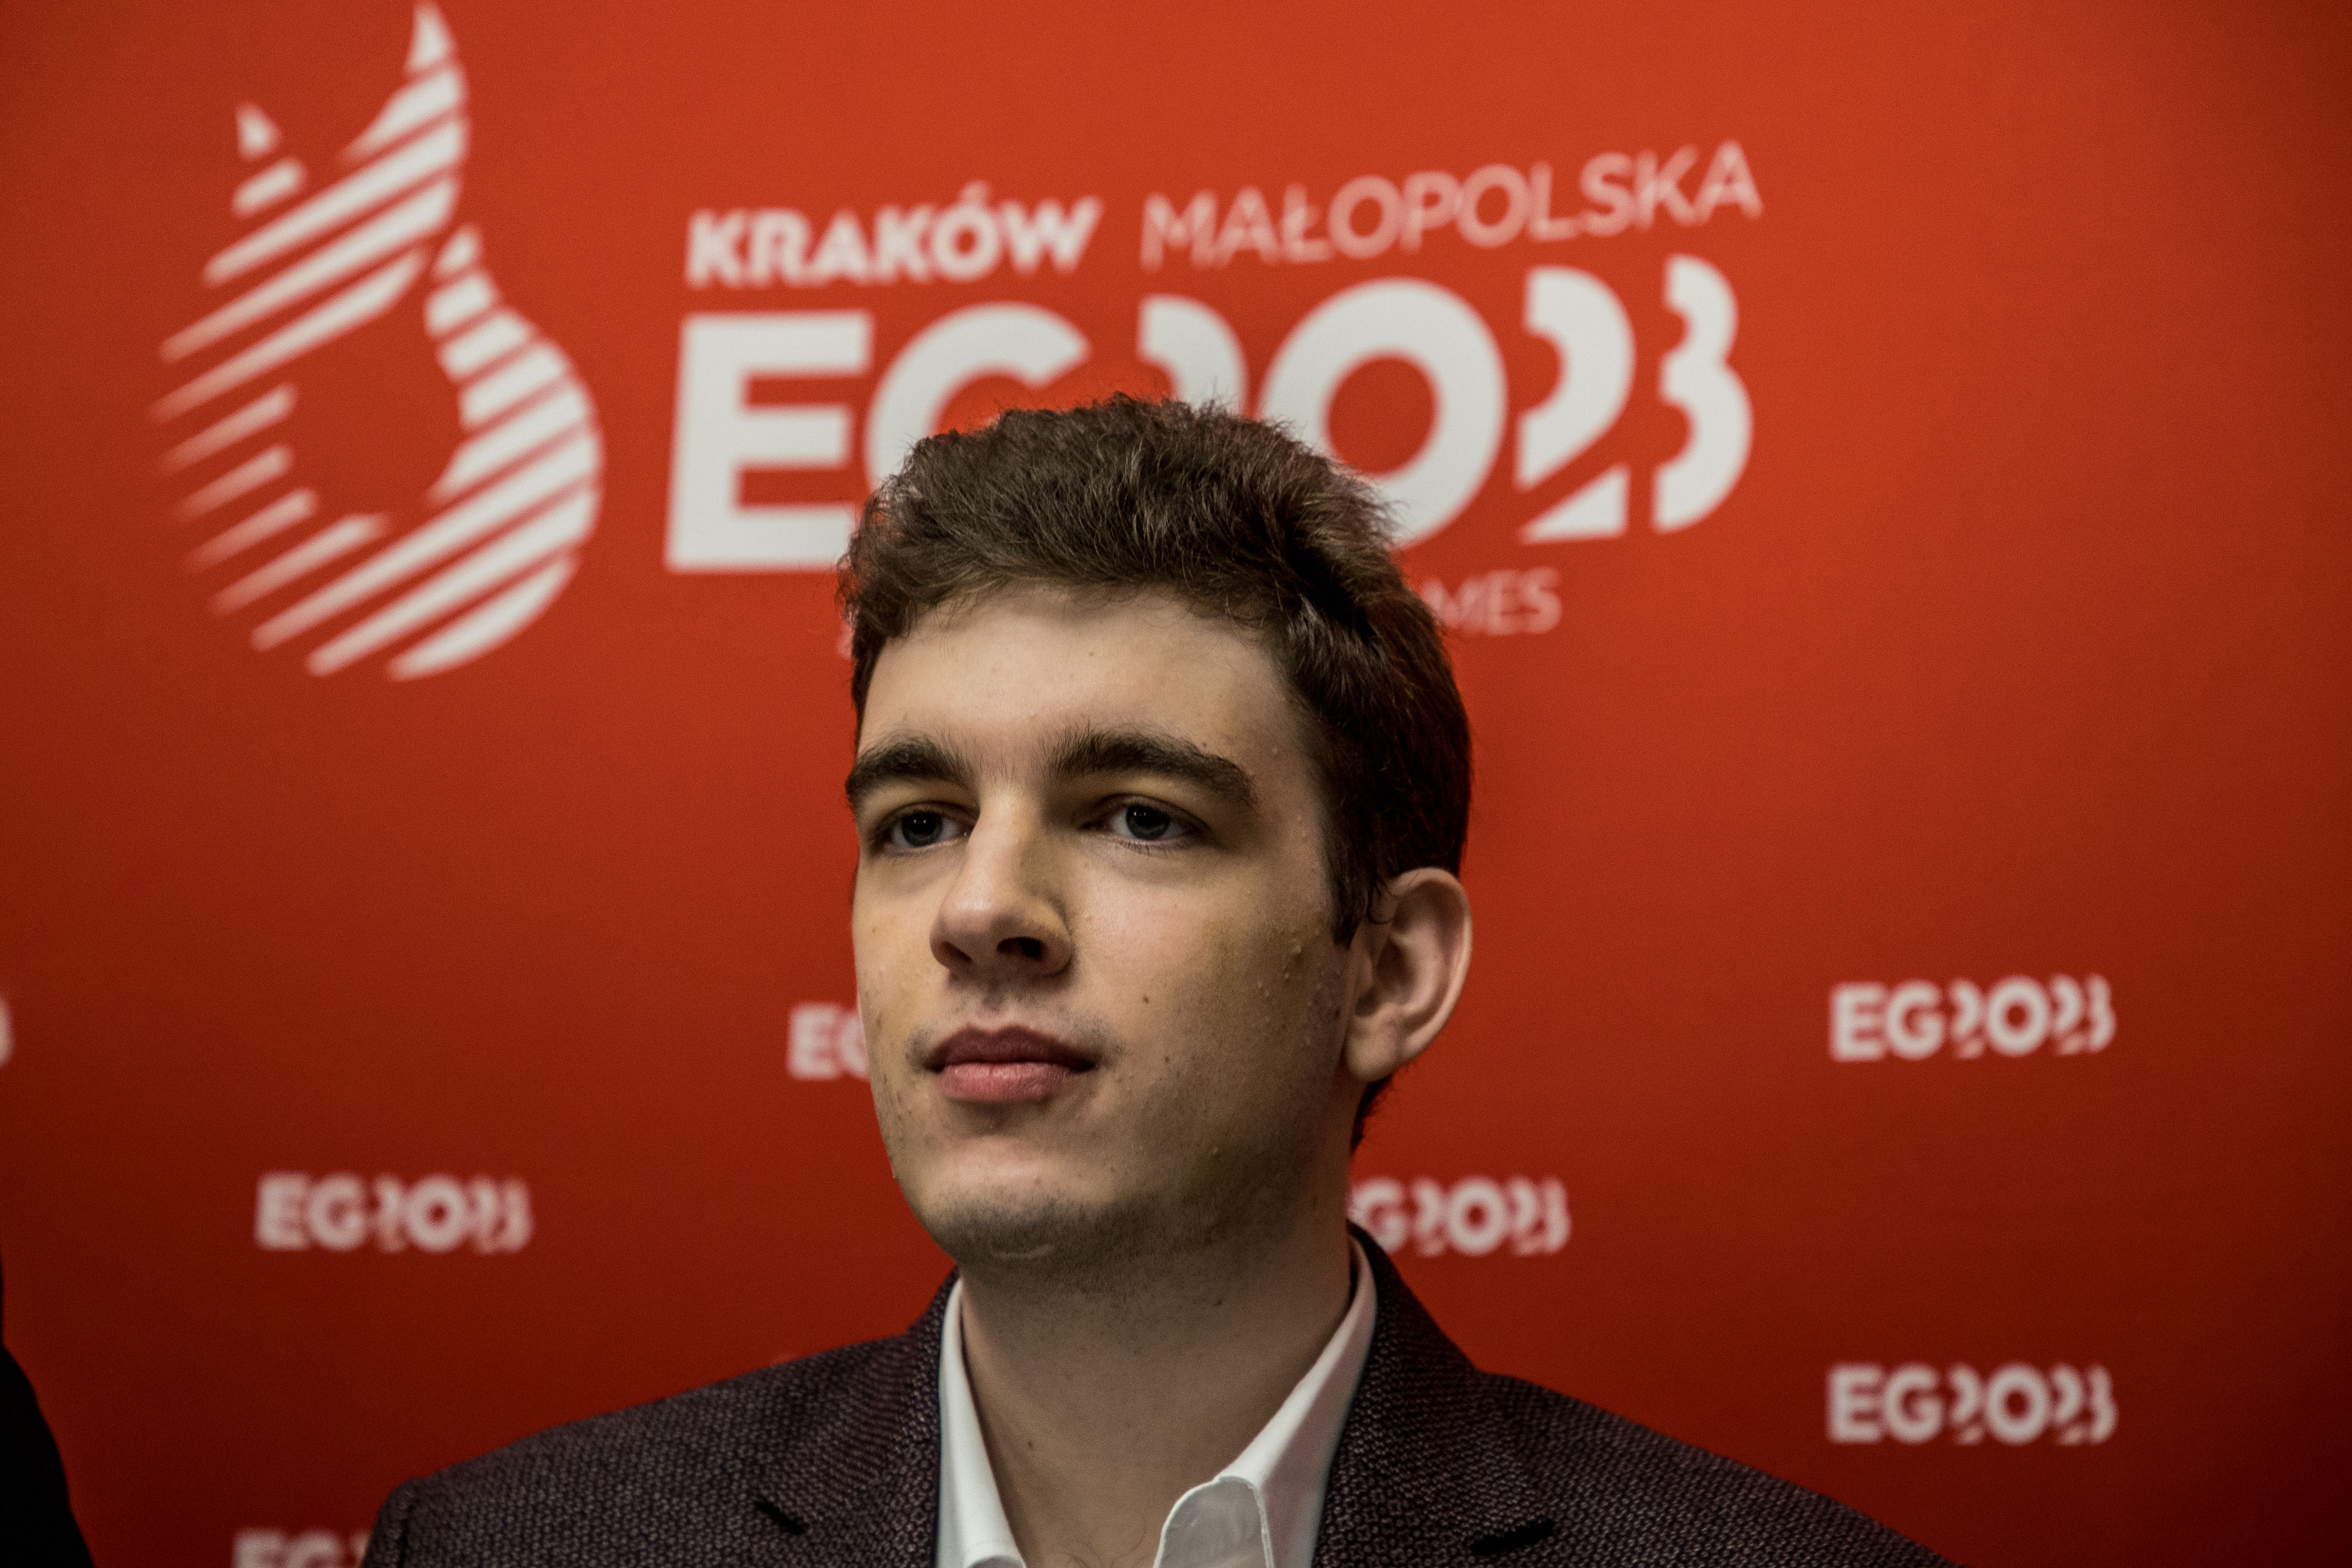 We know the composition of the national teams for the European Pair Blitz Chess Championship